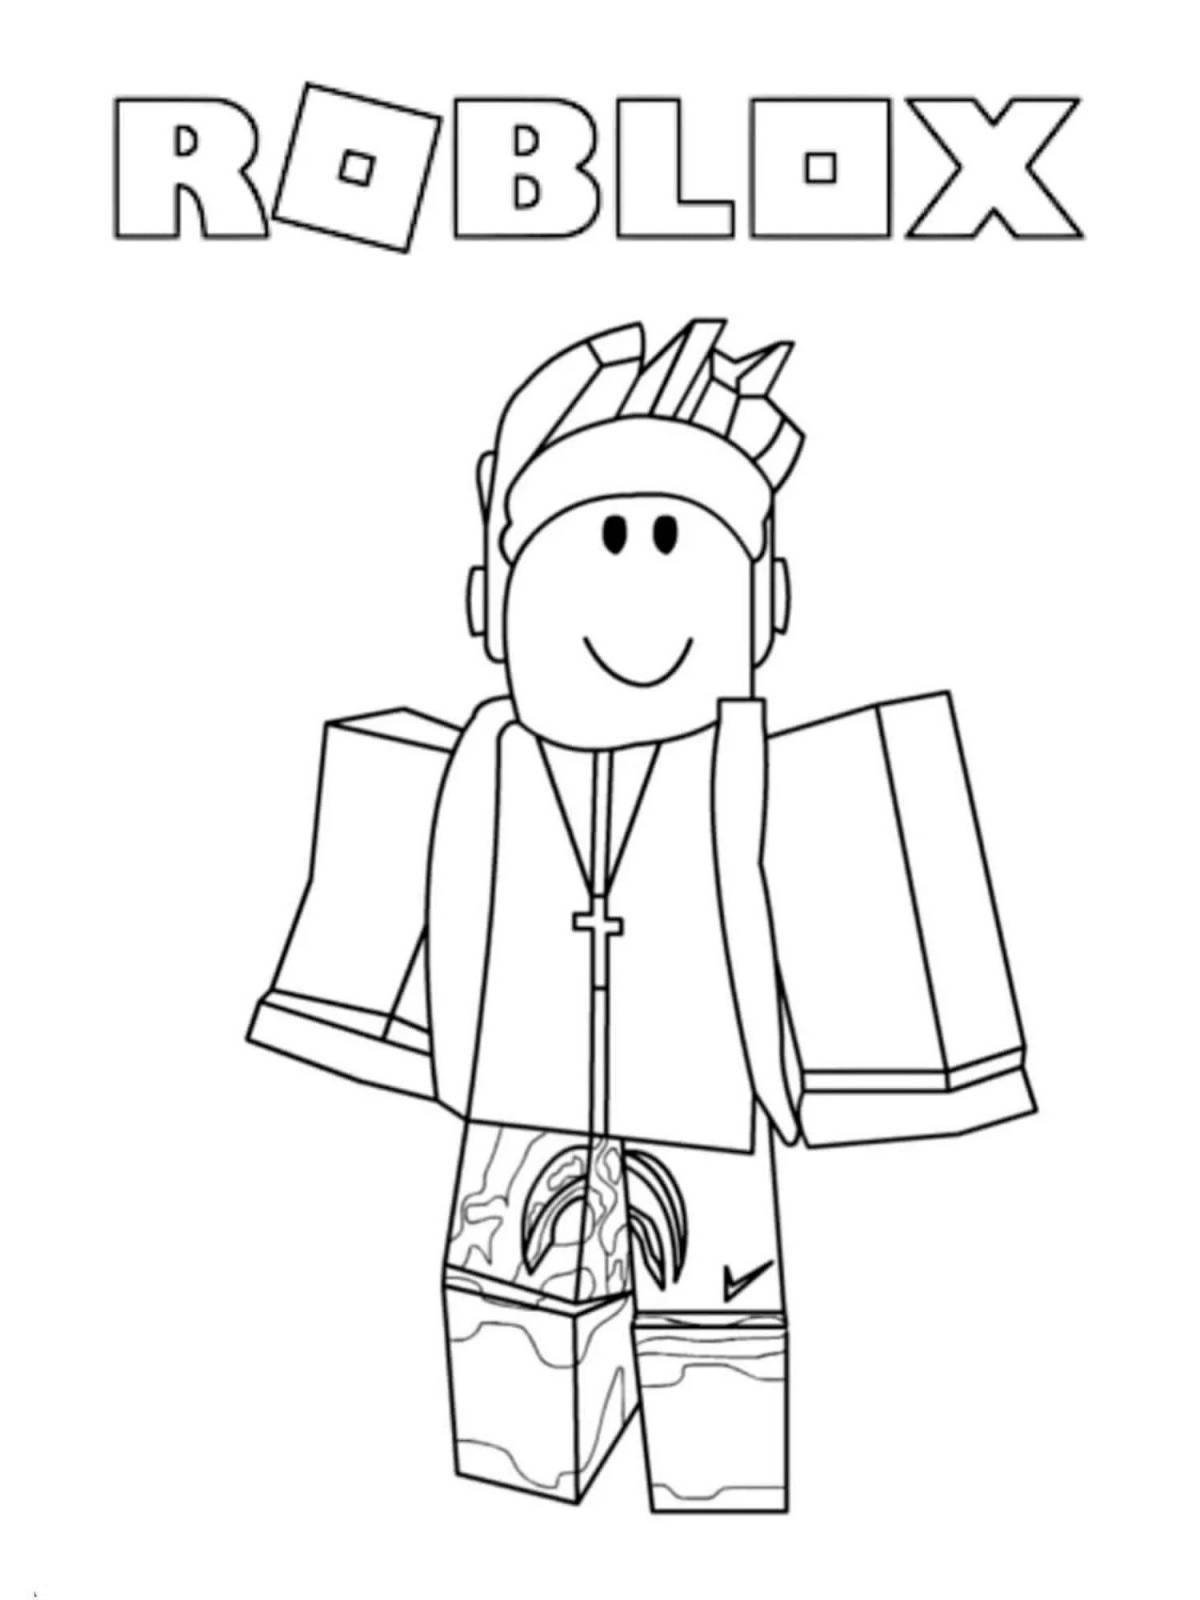 Colouring colorful roblox characters